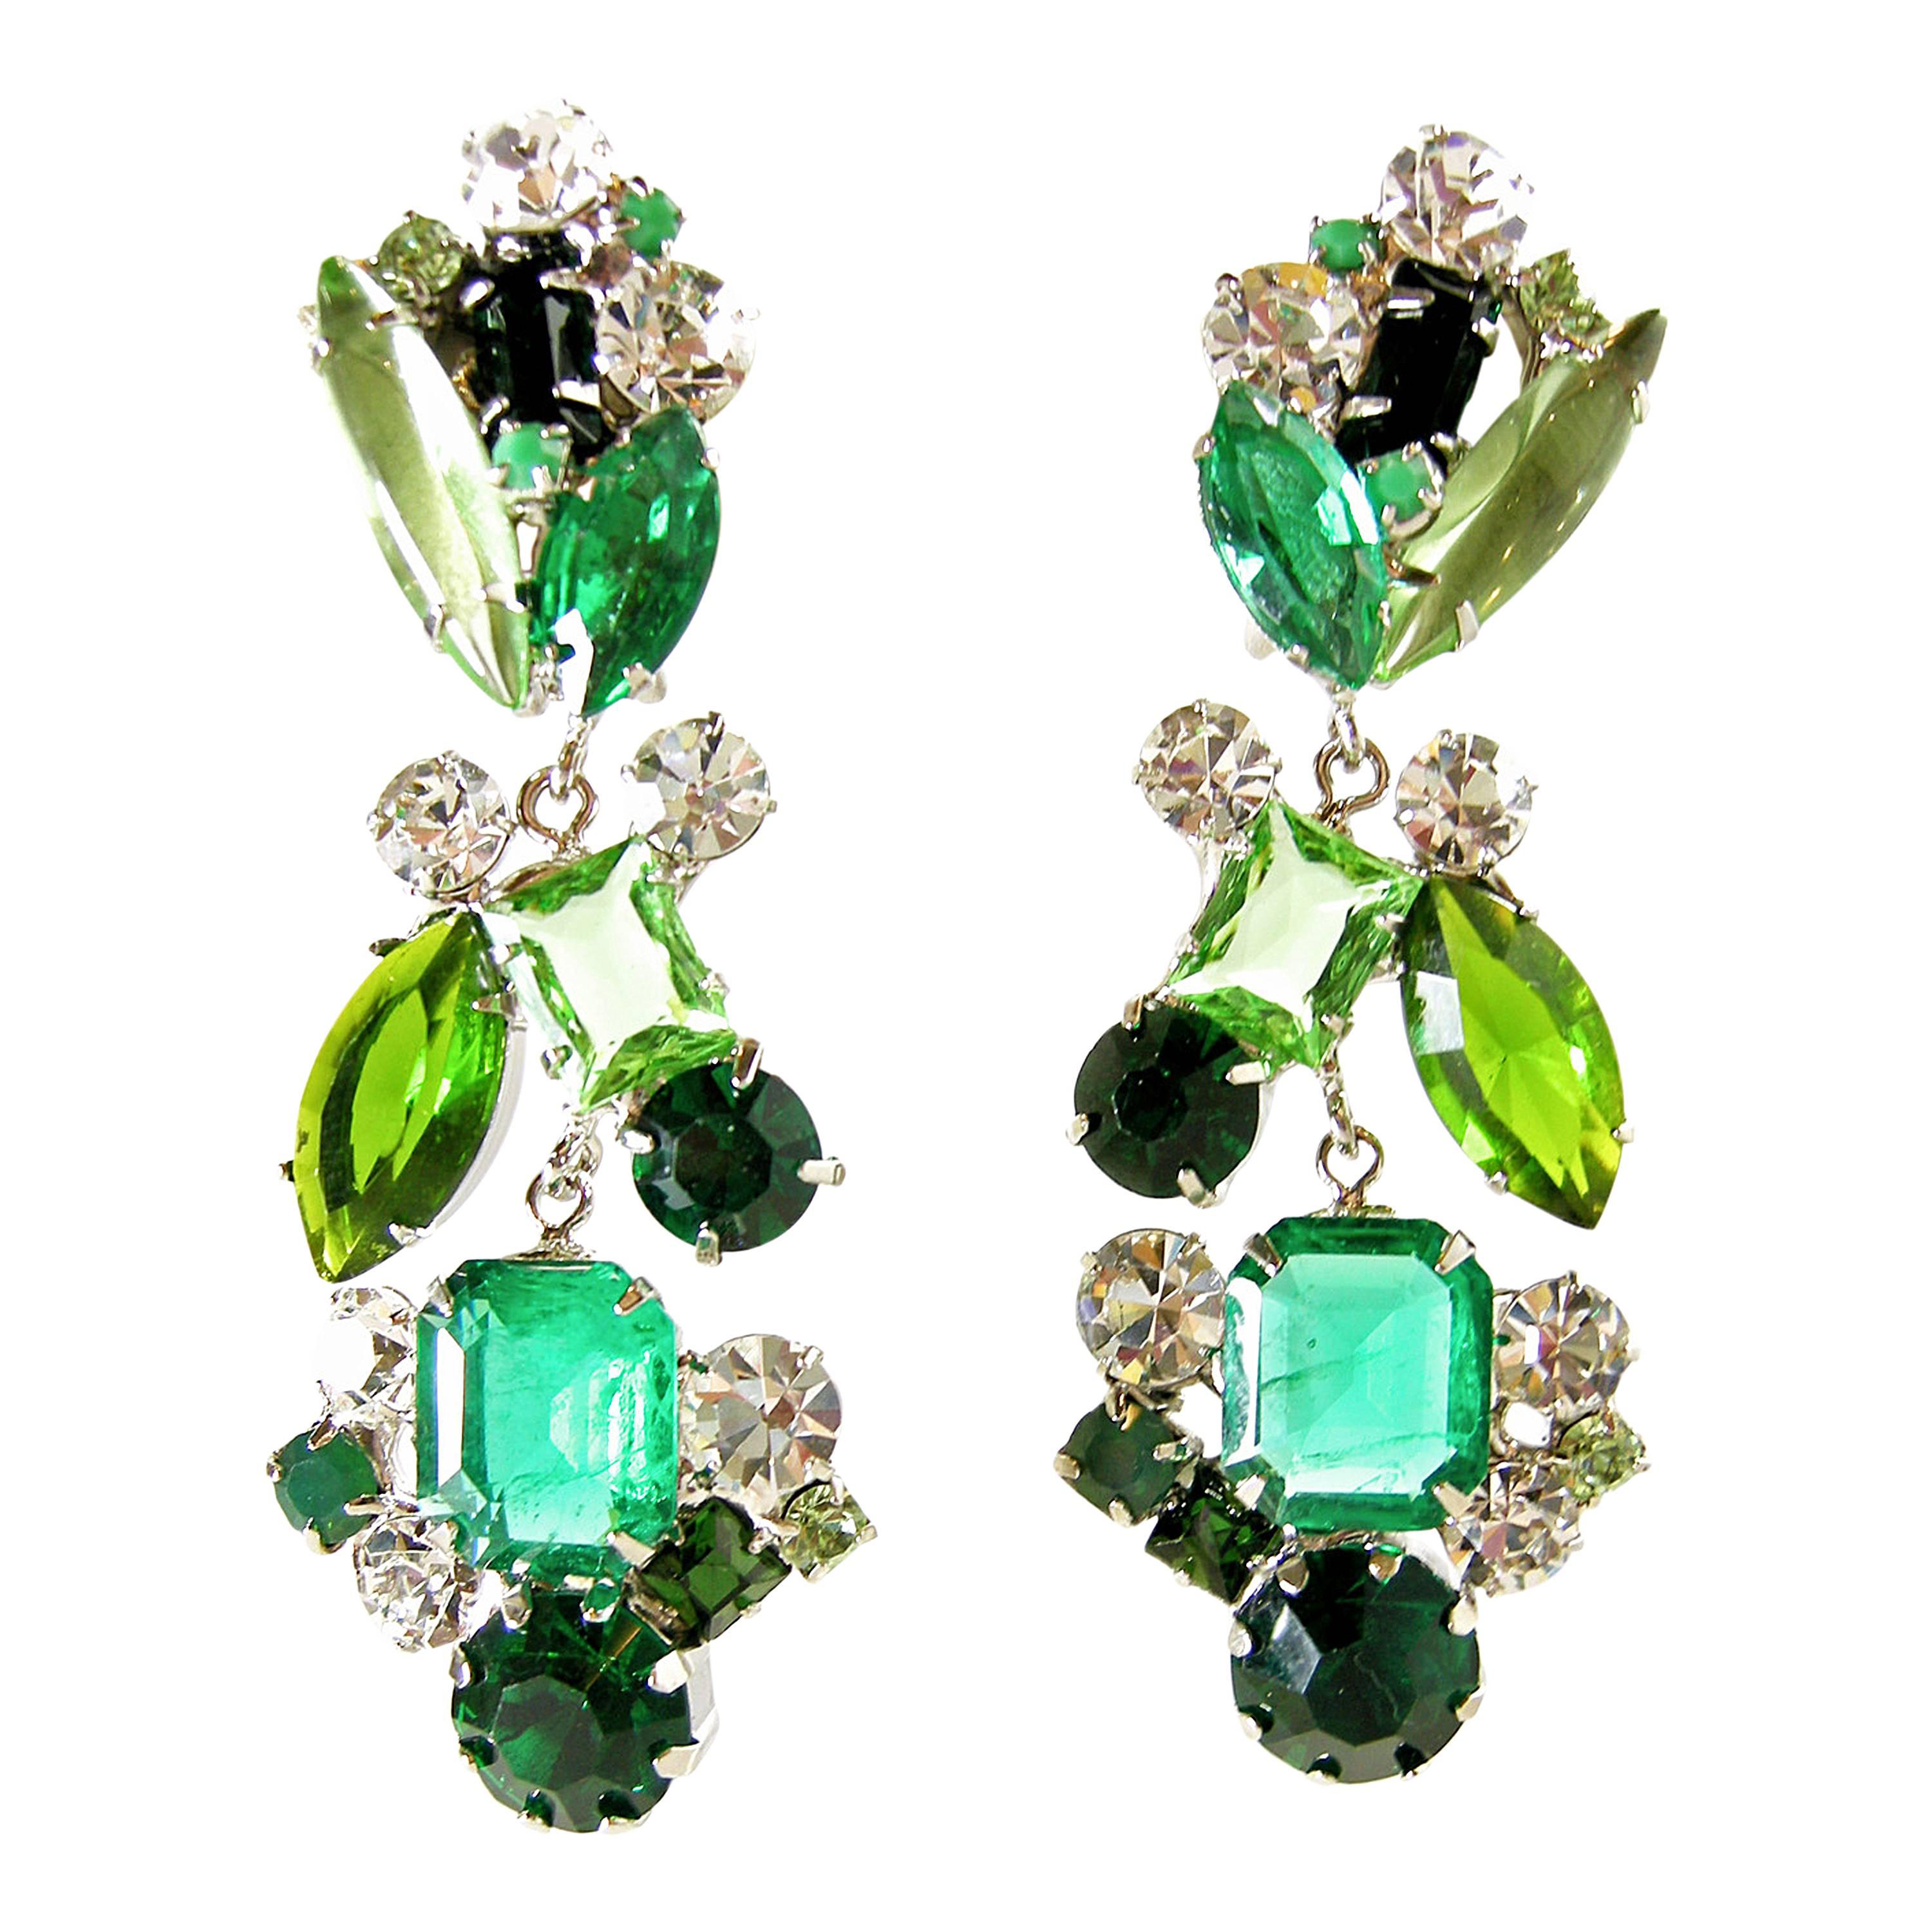 “One-of-a-Kind” Signed Robert Sorrell Green & Clear Crystal Dangling Earrings